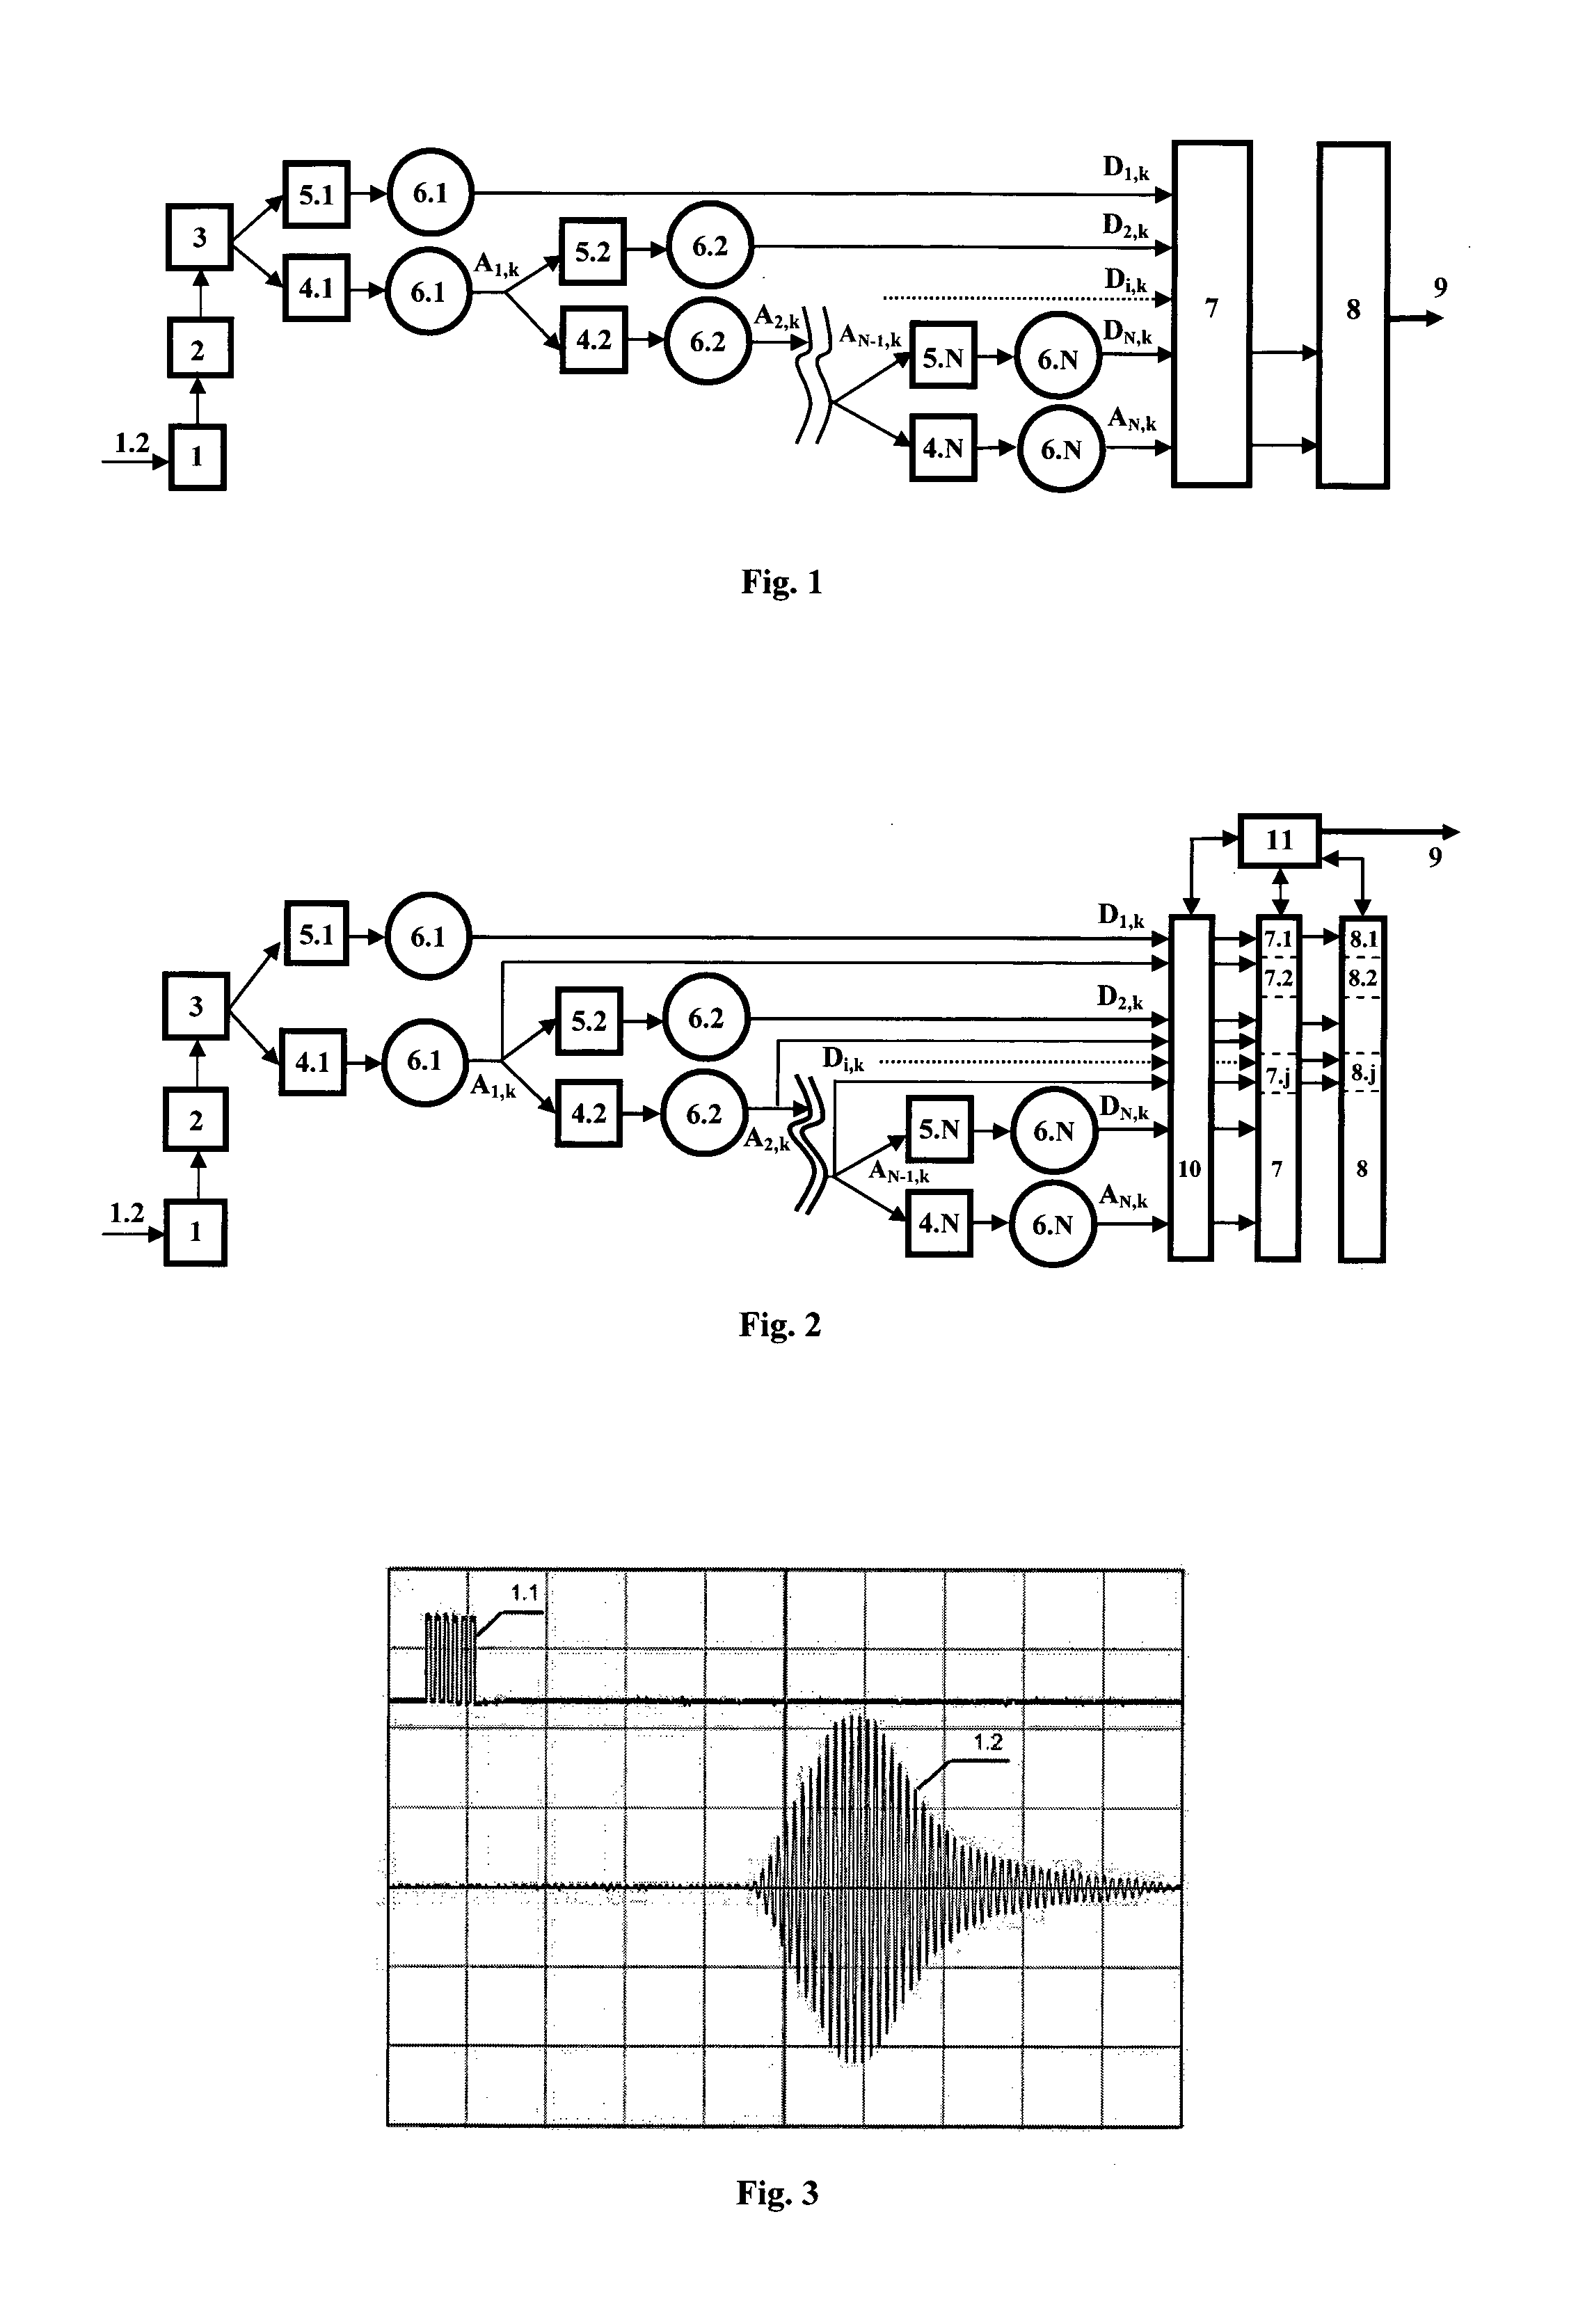 Method of Detecting and Identifying Substances or Mixtures and Determining Their Characteristics